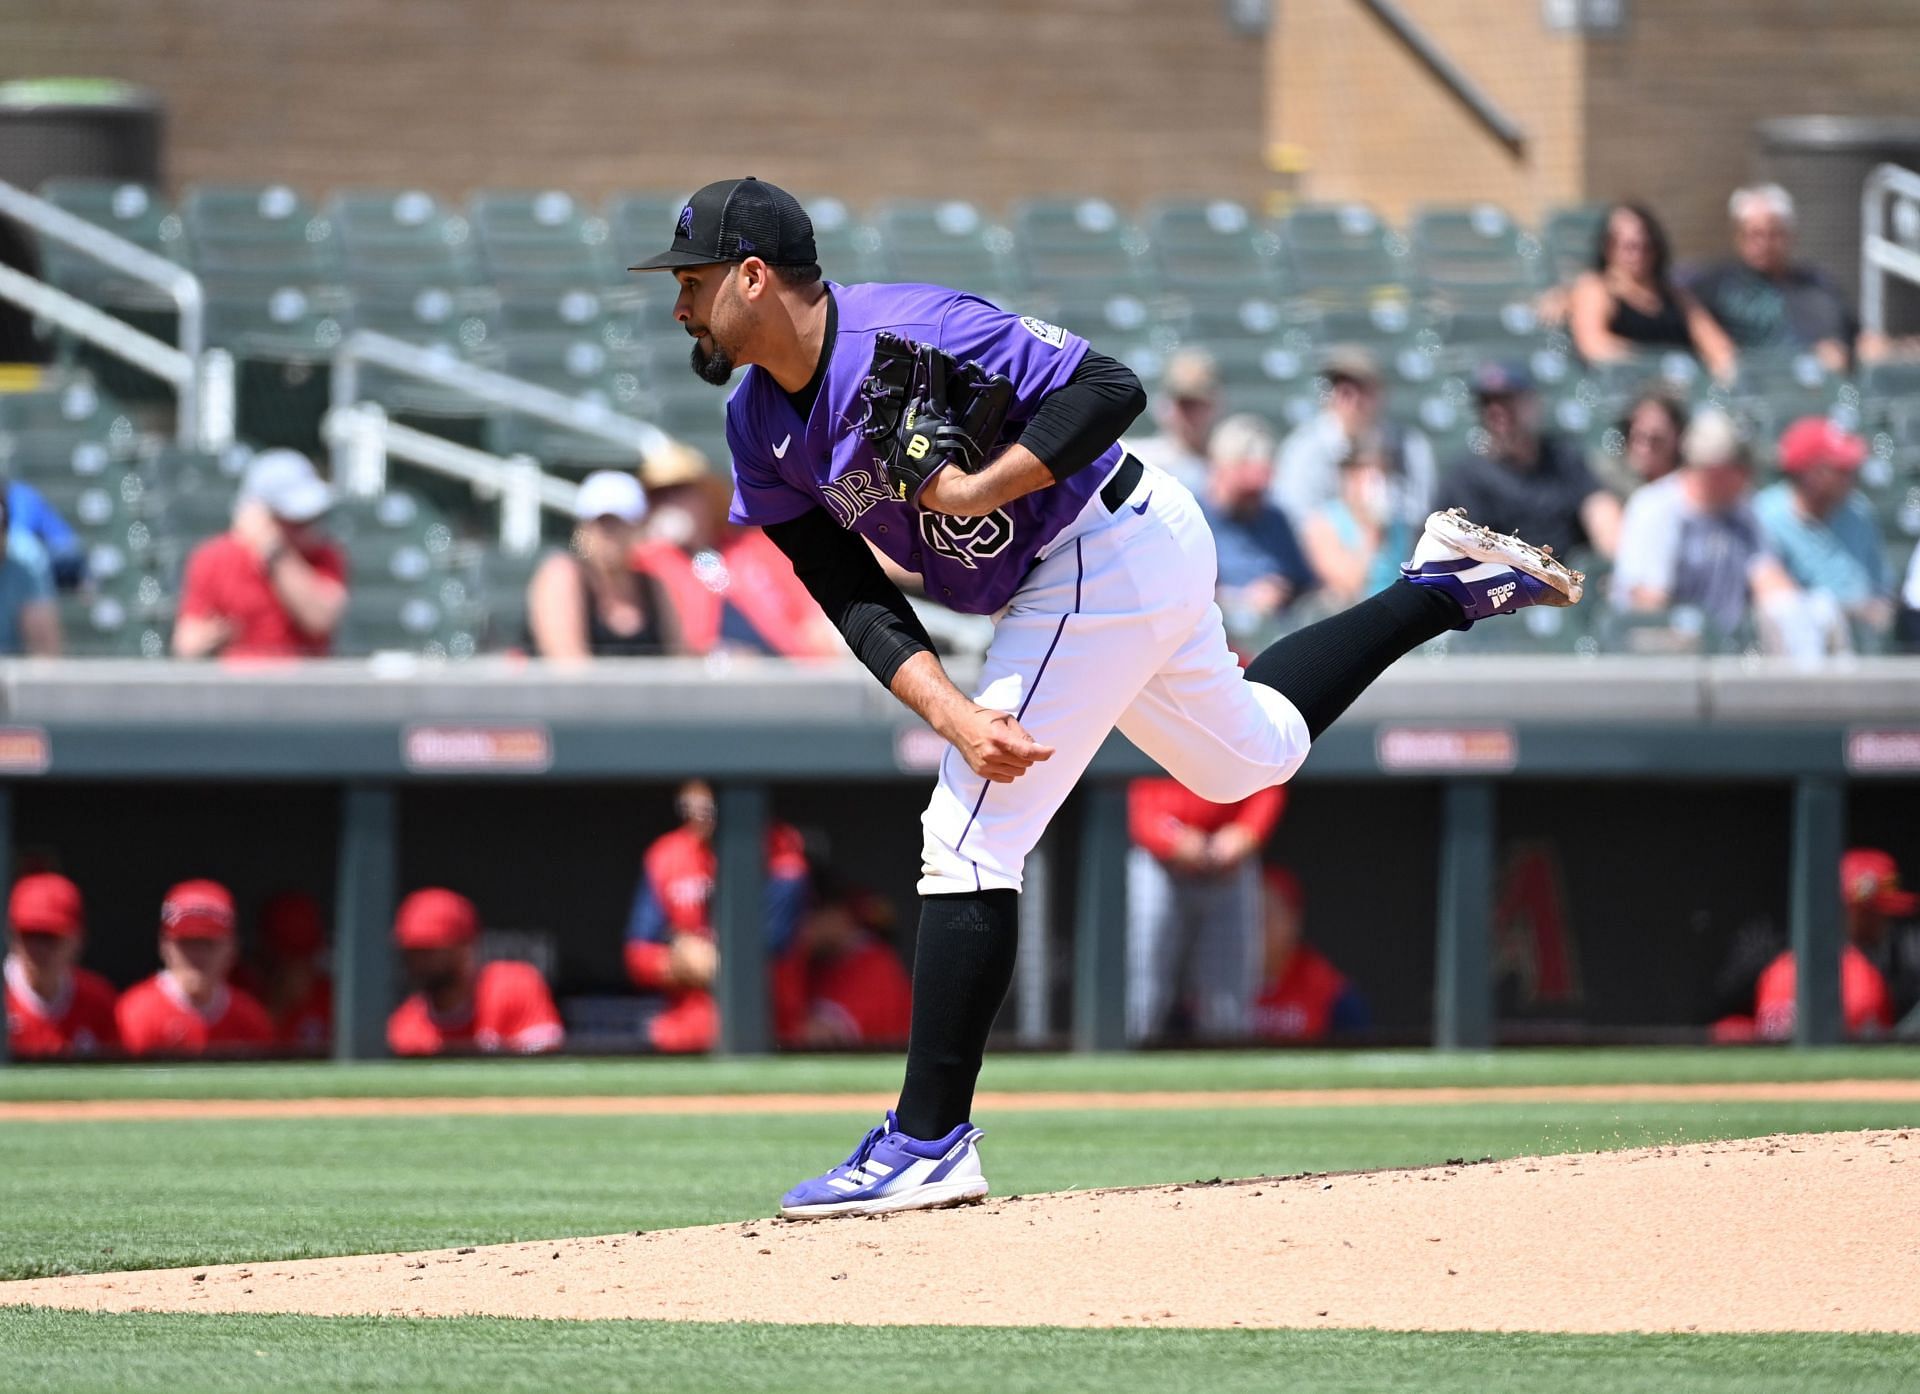 The Rockies also have very underrated uniforms